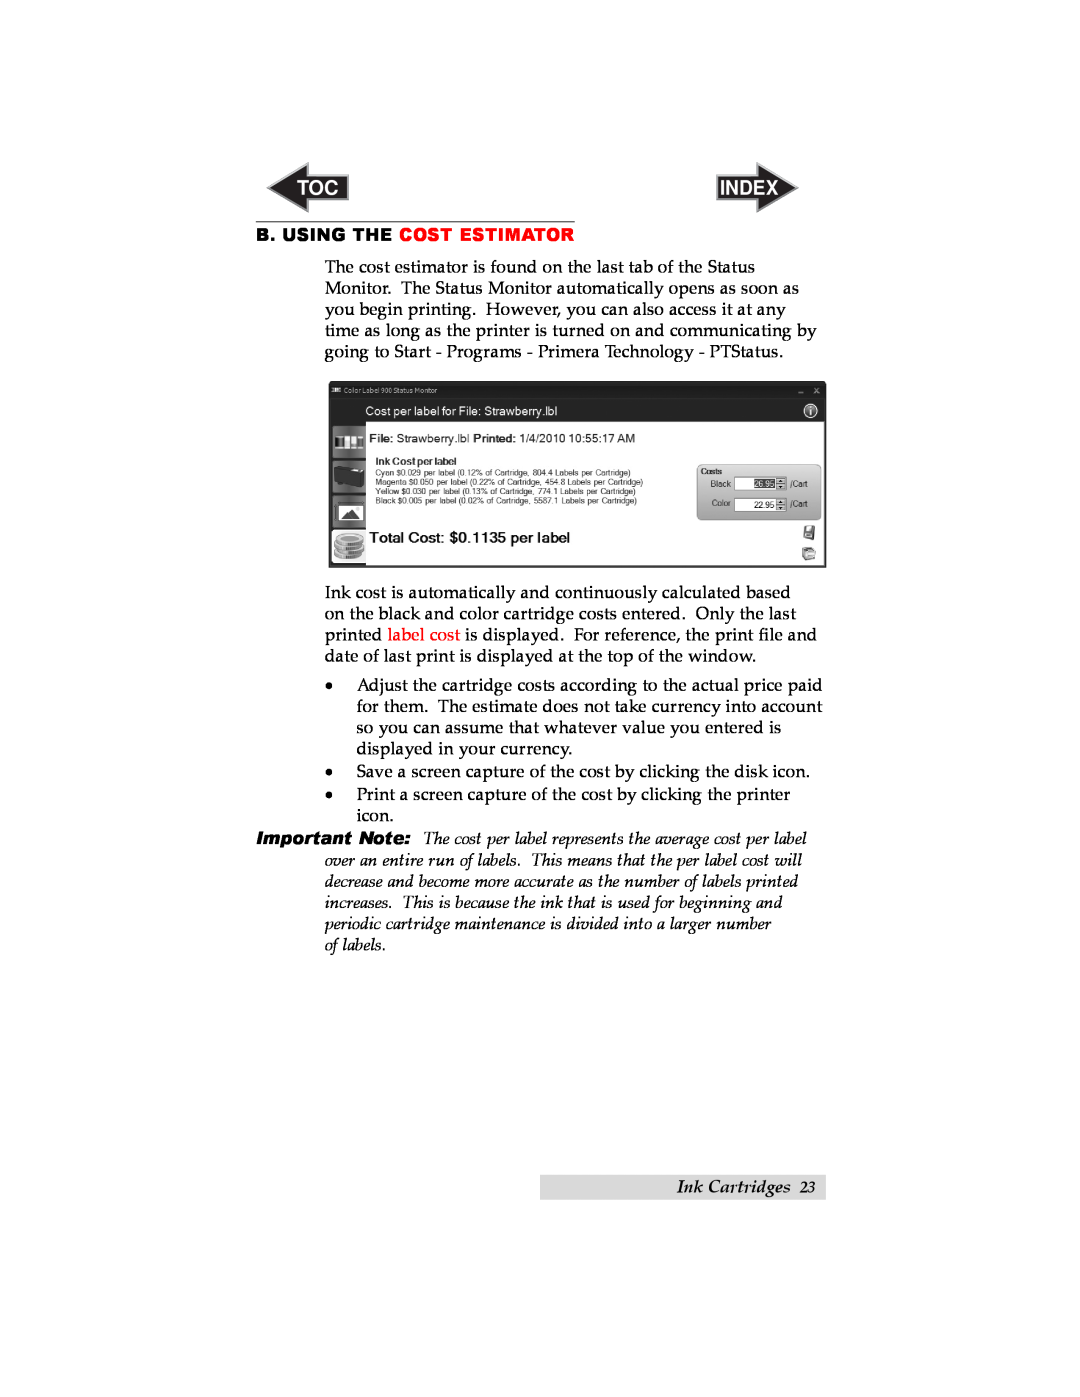 Primera Technology RX900 user manual B. Using The Cost Estimator, of labels, Index, Ink Cartridges 